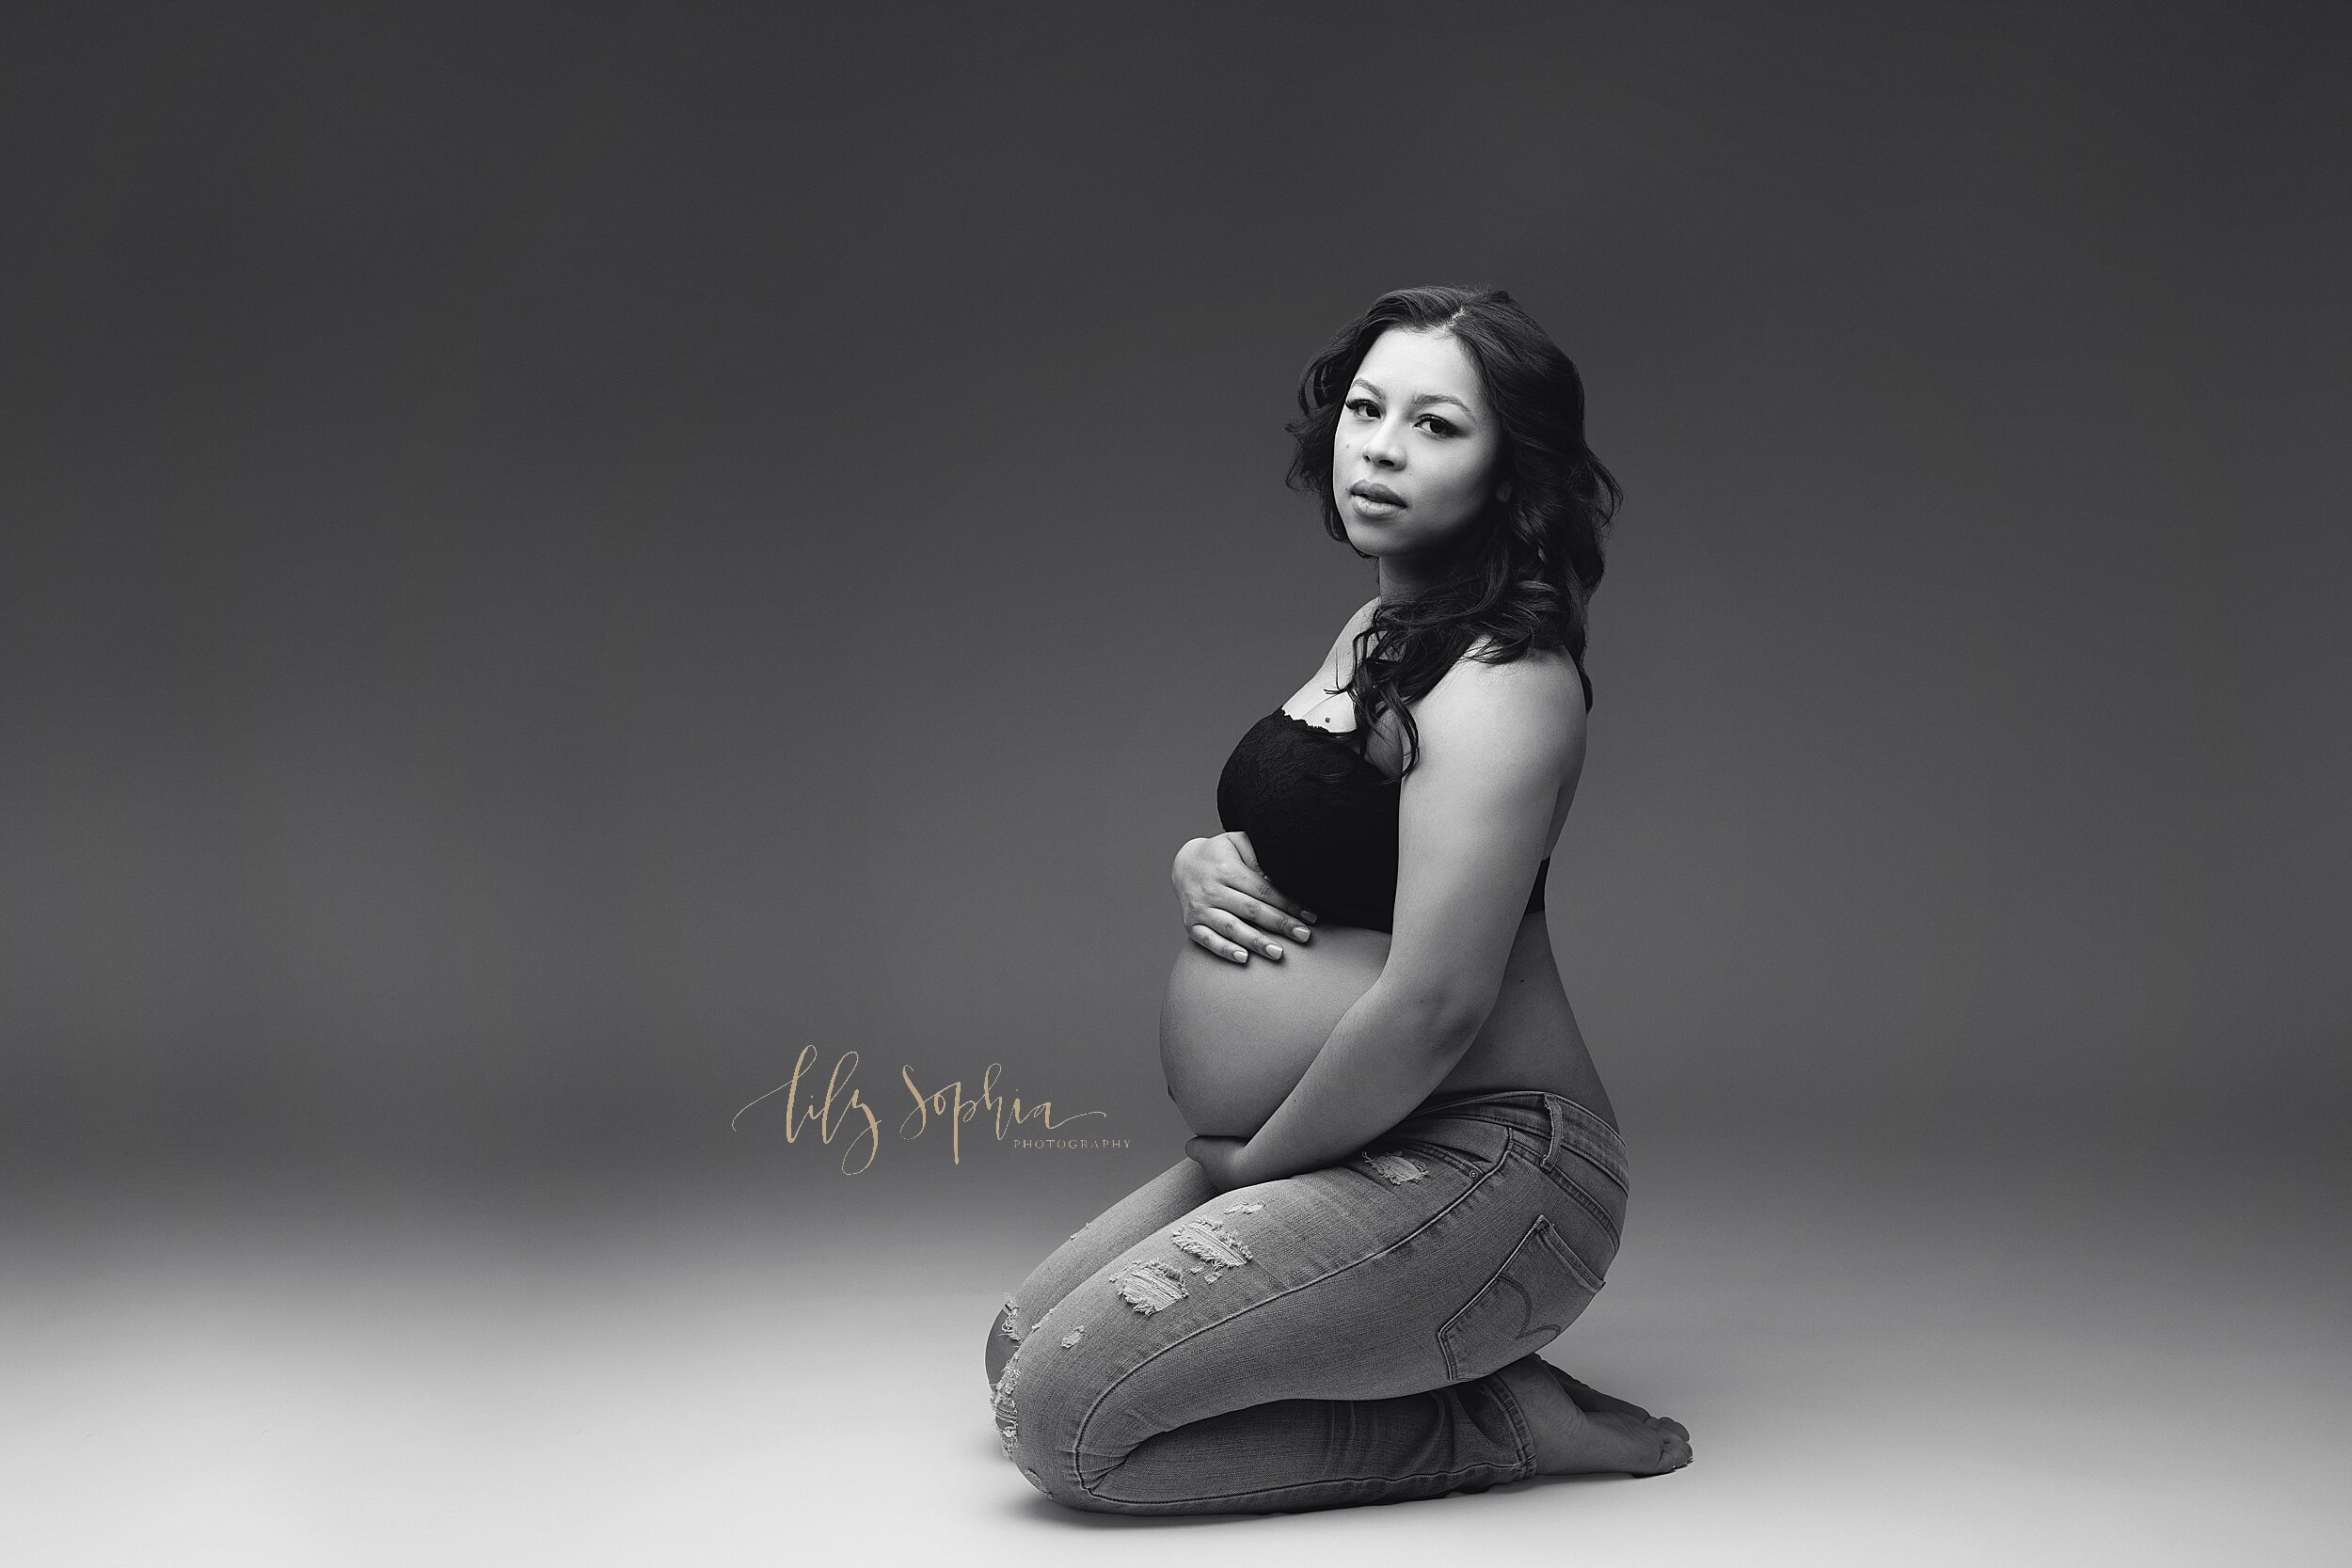  Fine Art Maternity image of Hispanic woman  sitting on her knees wearing a black lace bandeau bra and ripped jeans while cradling her pregnant belly in Atlanta, Georgia studio. 